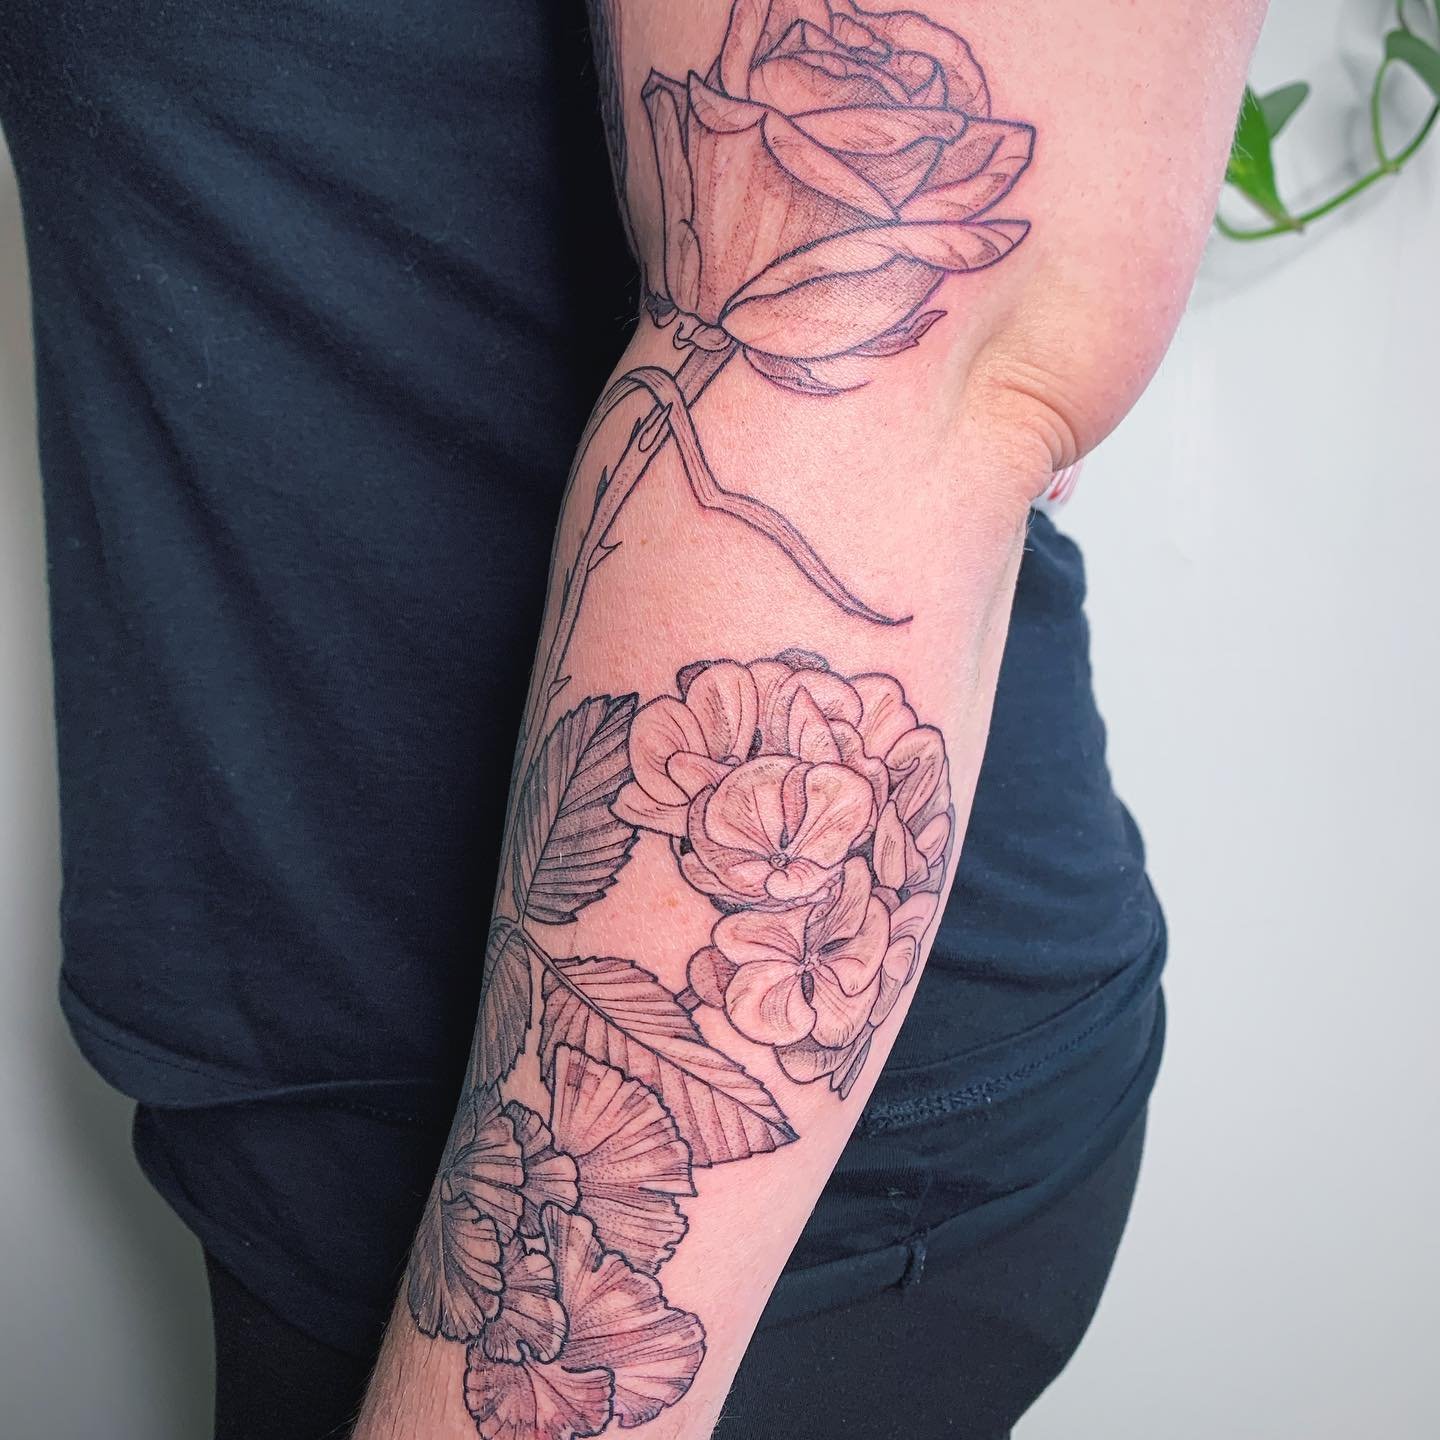 gardens full of meaning and memories

&bull;geranium, two garden roses and crinkly wheat woven together on a forearm&bull;

#BotanicalTattoo #RoseTattoo #RoseTattoos #Geranium #wheat #WheatTattoo #QueerTattoo #QueerTattooer #yyjTattoo #YyjTattooArtis